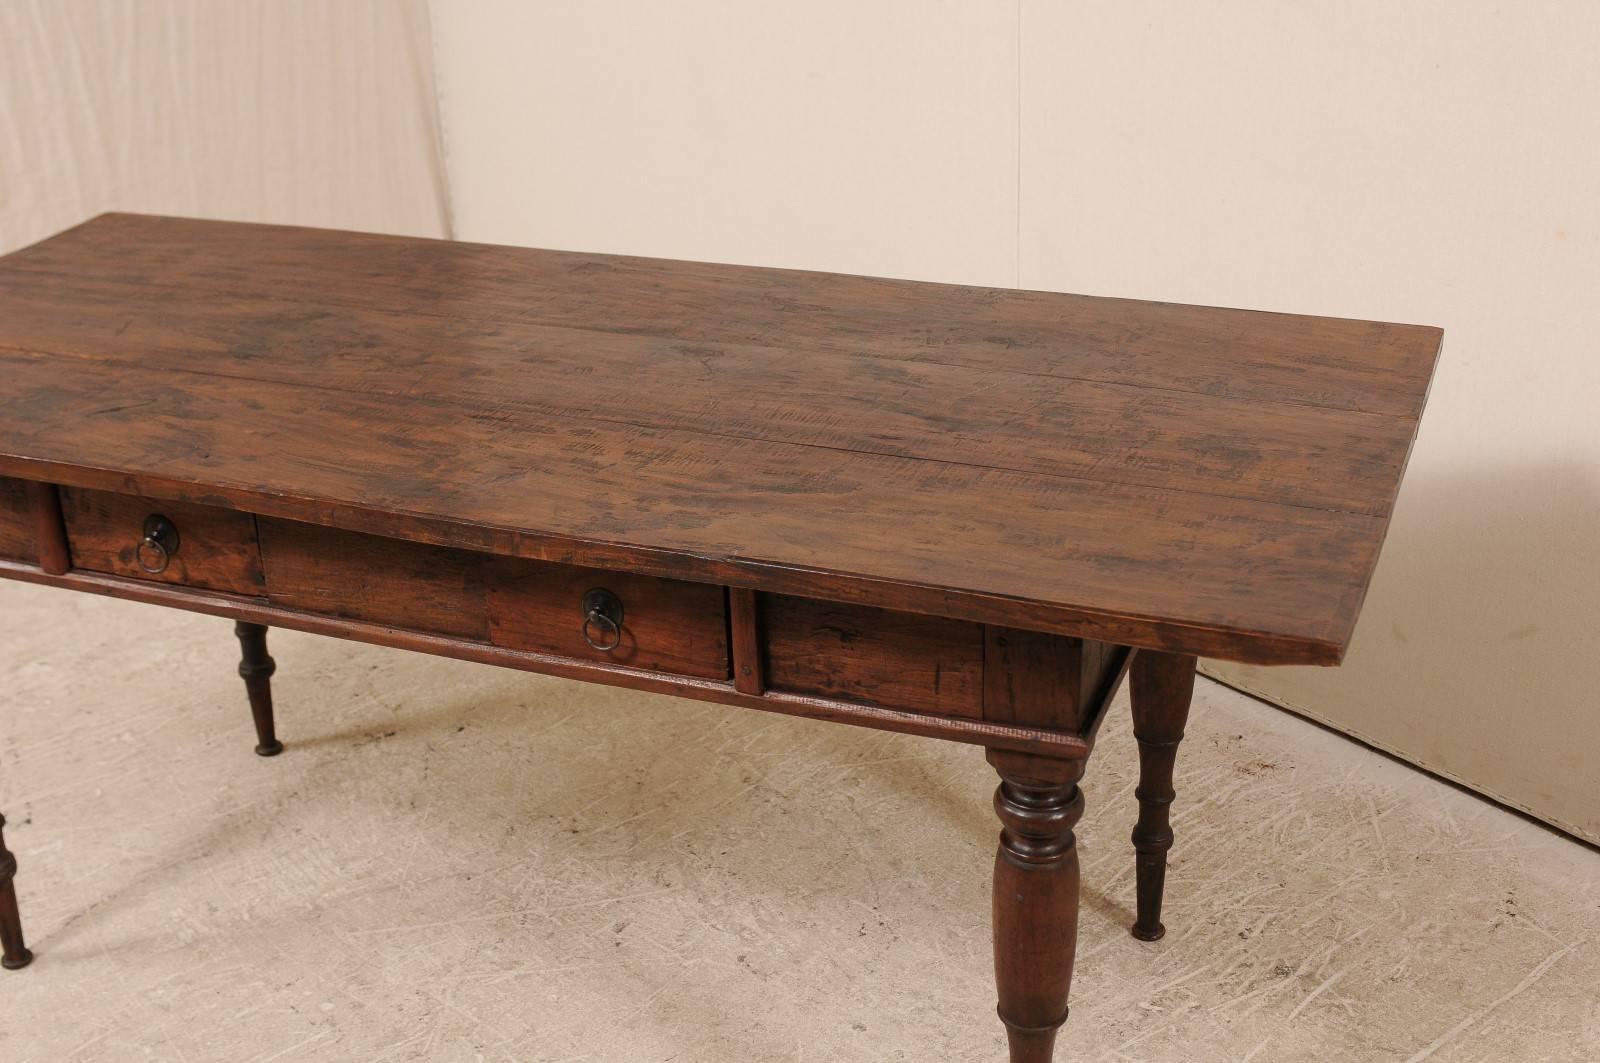 Brazilian Table from the Early 20th Century of Rich Brown Wood with Two Drawers 1